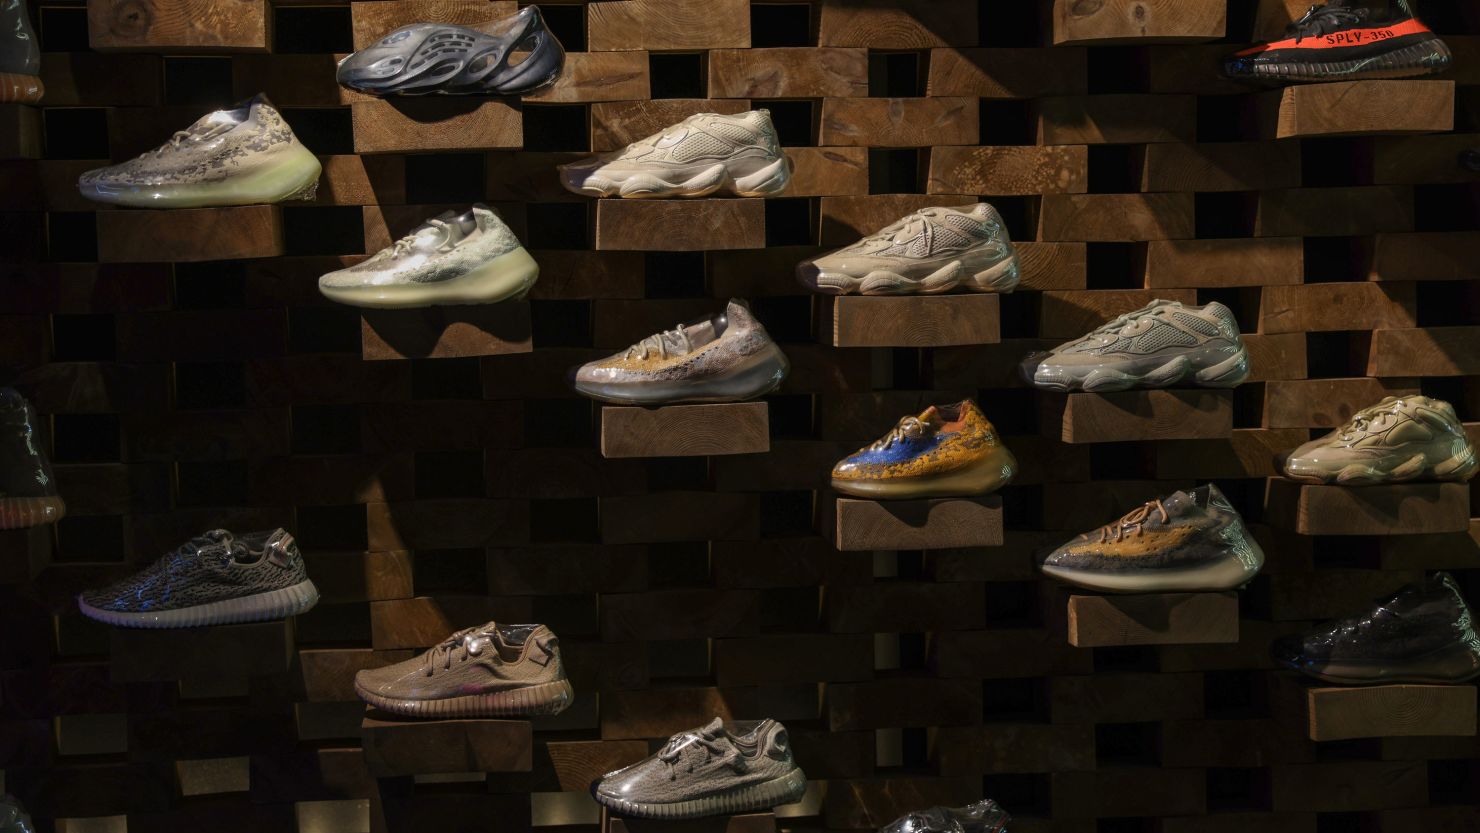 Adidas Yeezy trainers inside the Presented By sneaker resale store in London, pictured in August 2021.